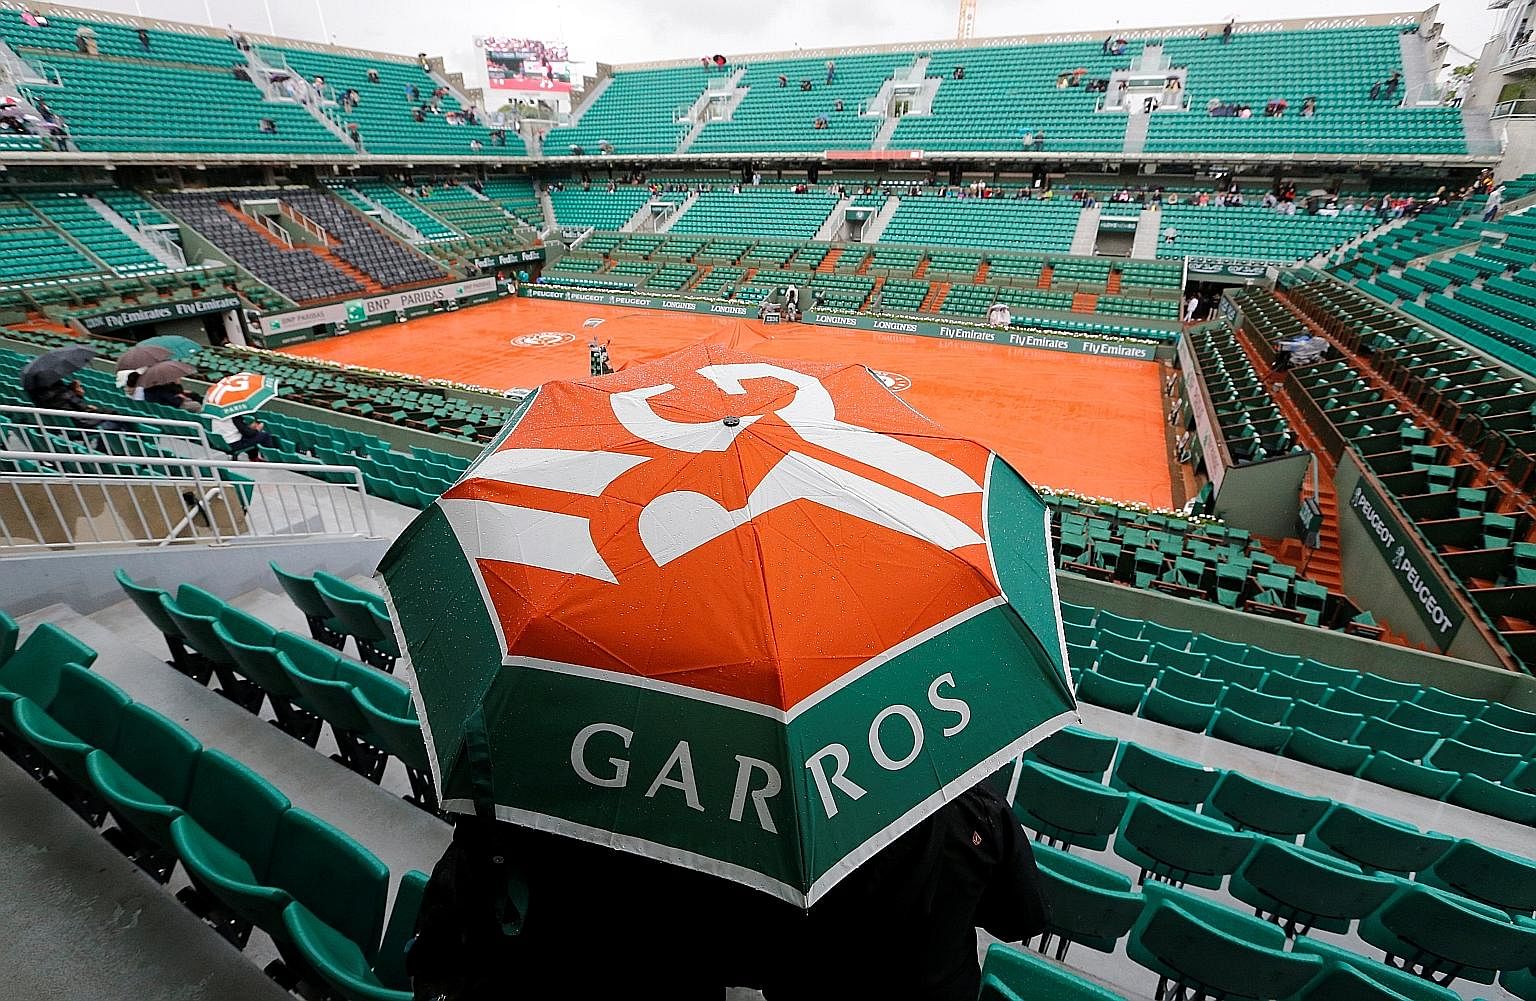 Rain halts play often at Roland Garros and conditions are tough when the ball gets wet and heavy. Ultimately, players just have to adjust.